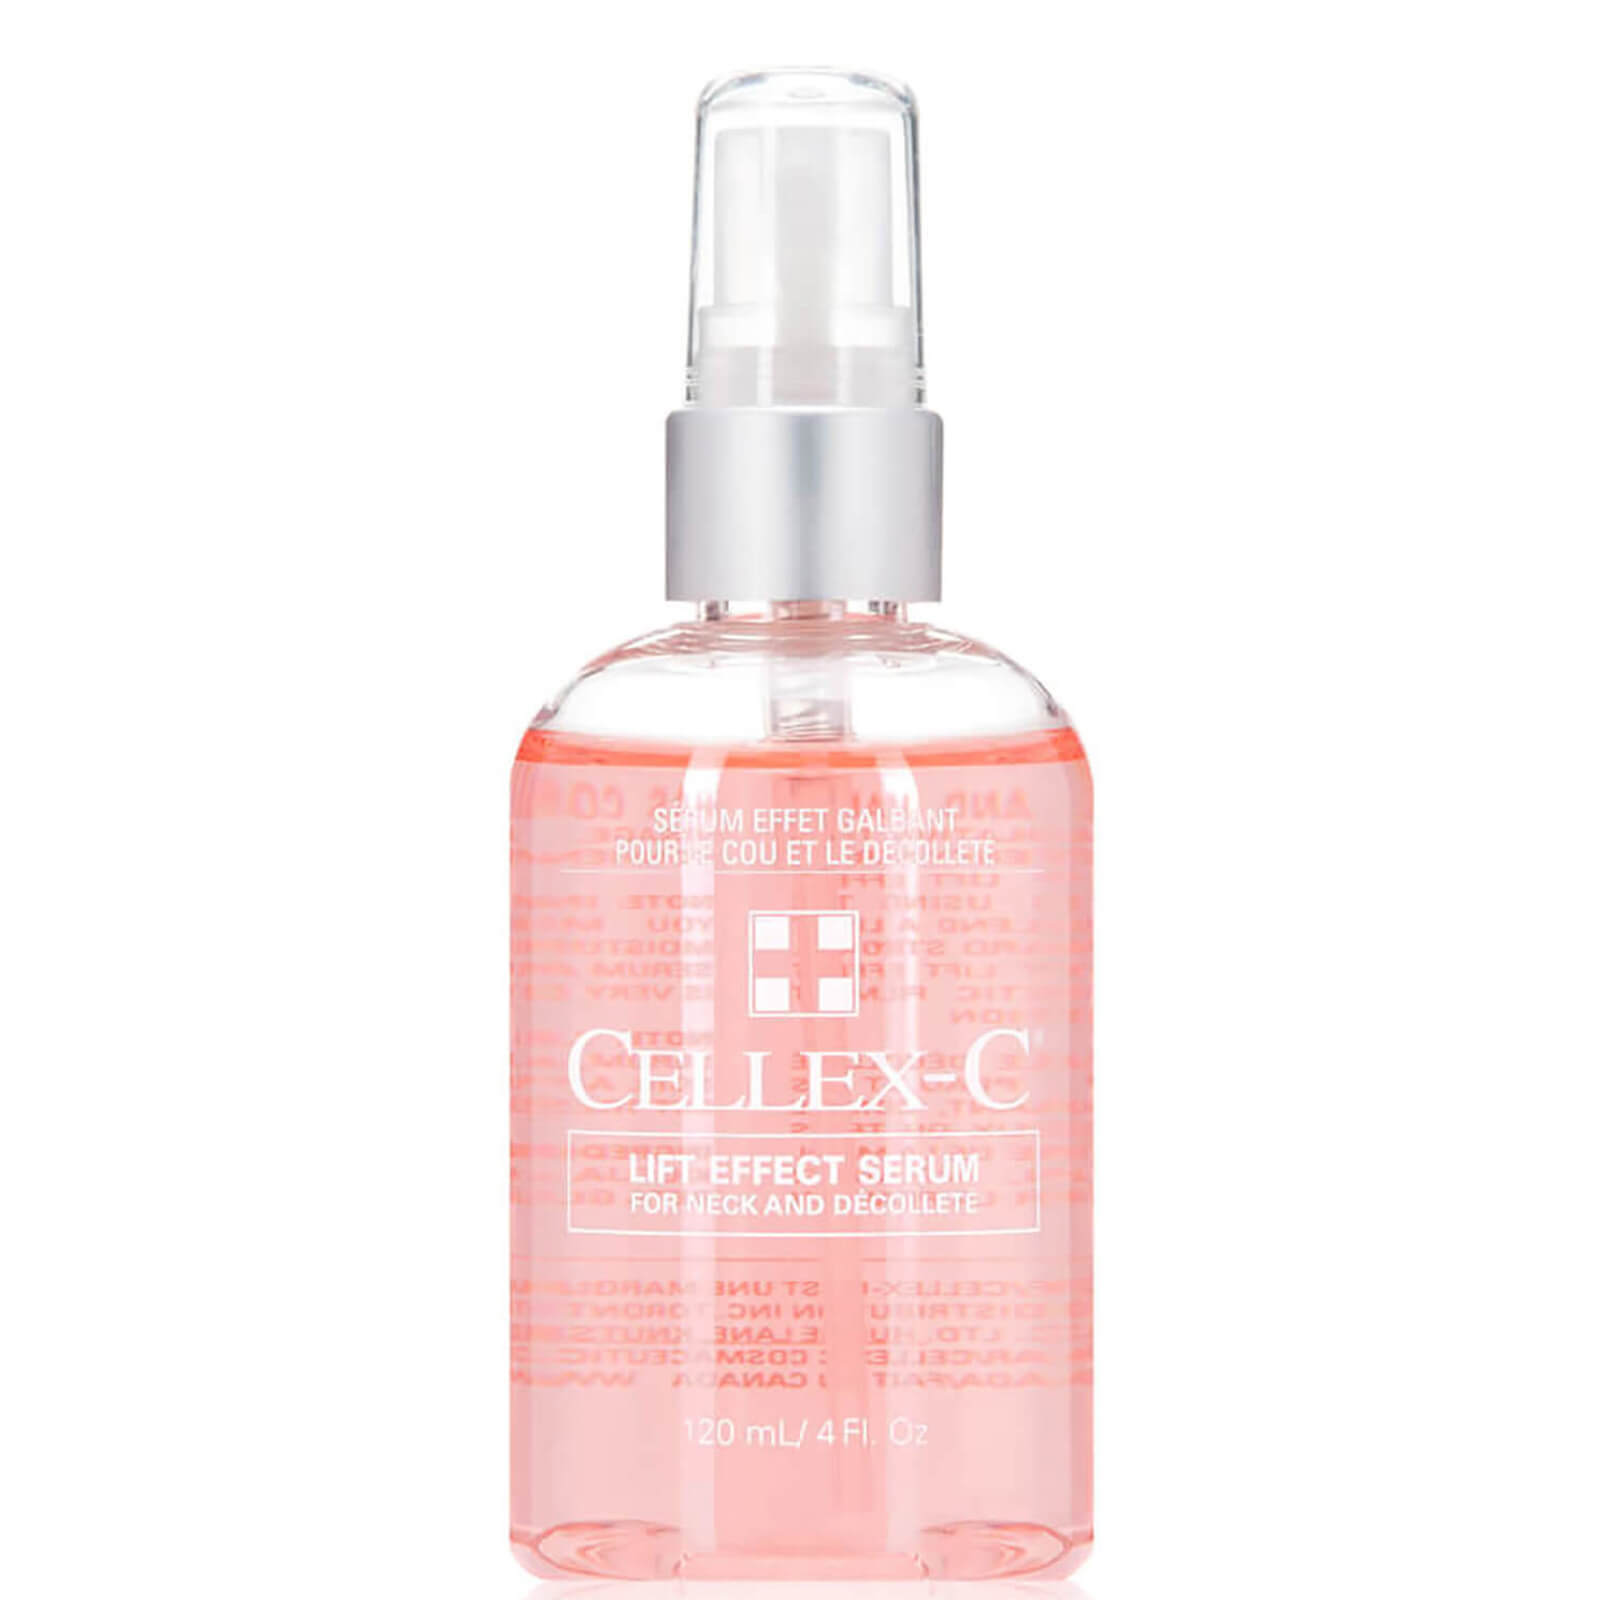 Cellex-c Lift Effect Serum For Neck And Decollete 4 Oz. In White